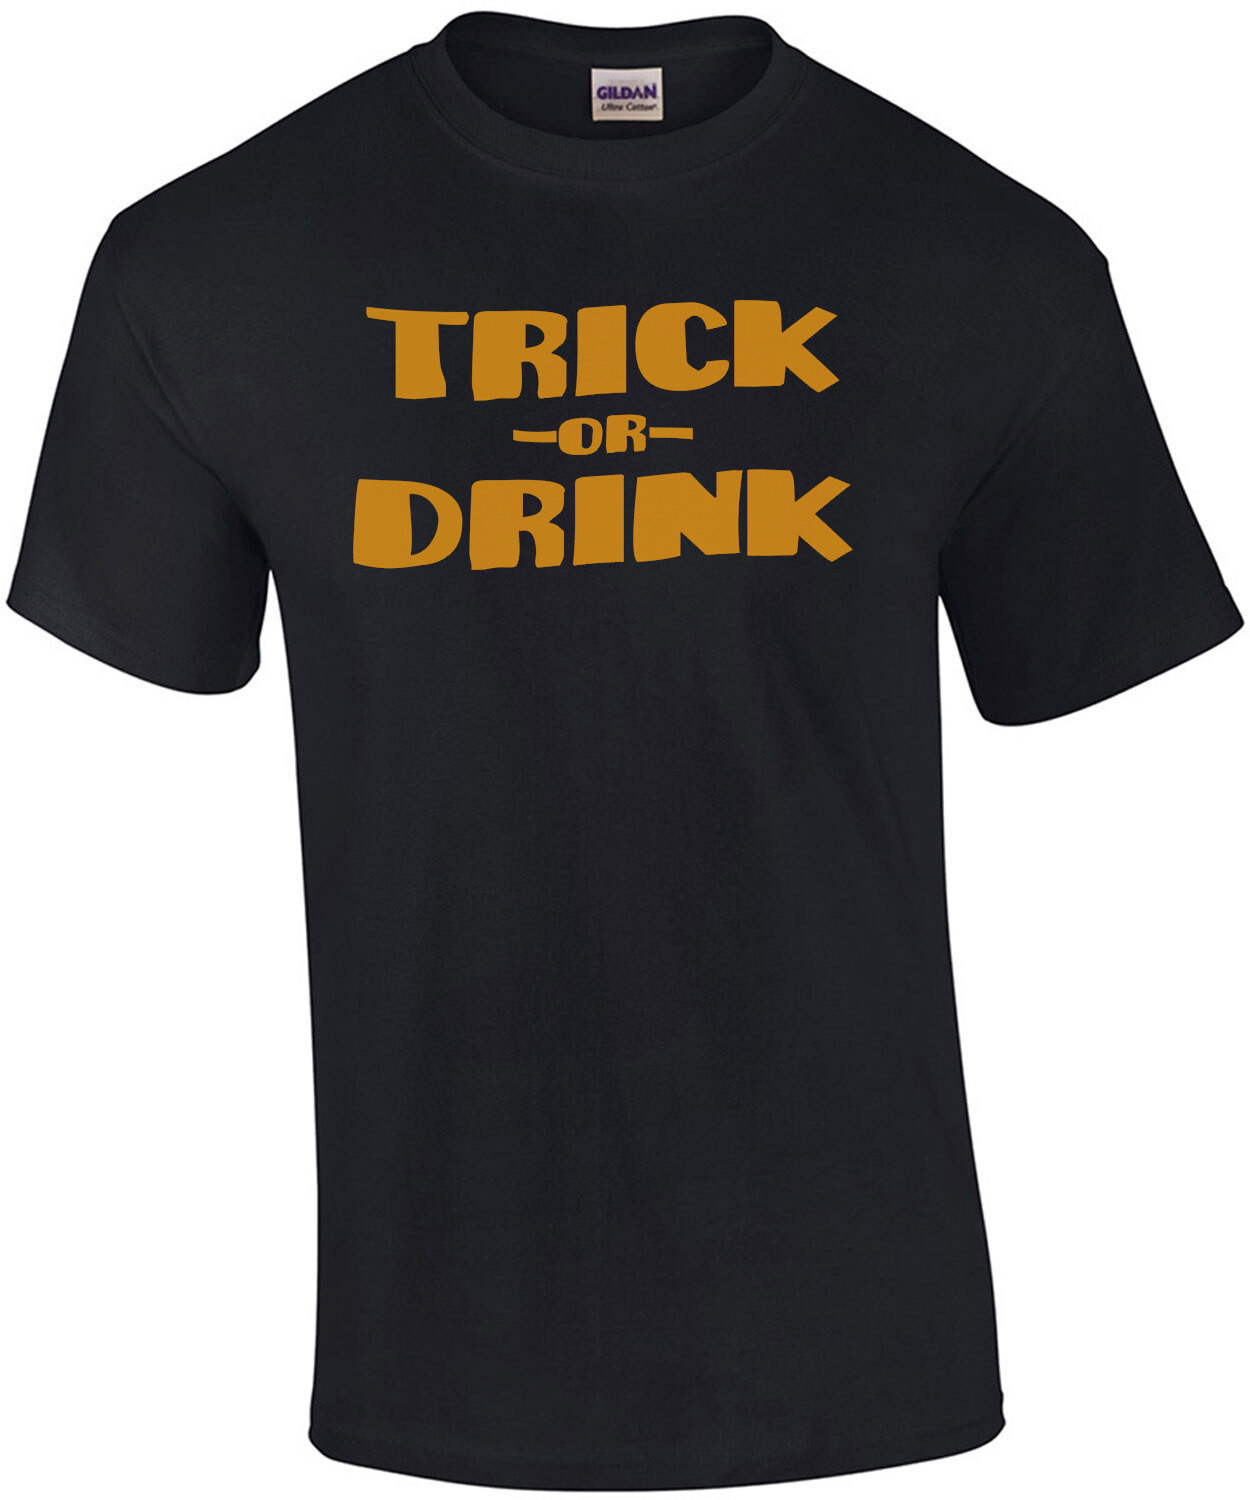 Trick or Drink Halloween T-Shirt